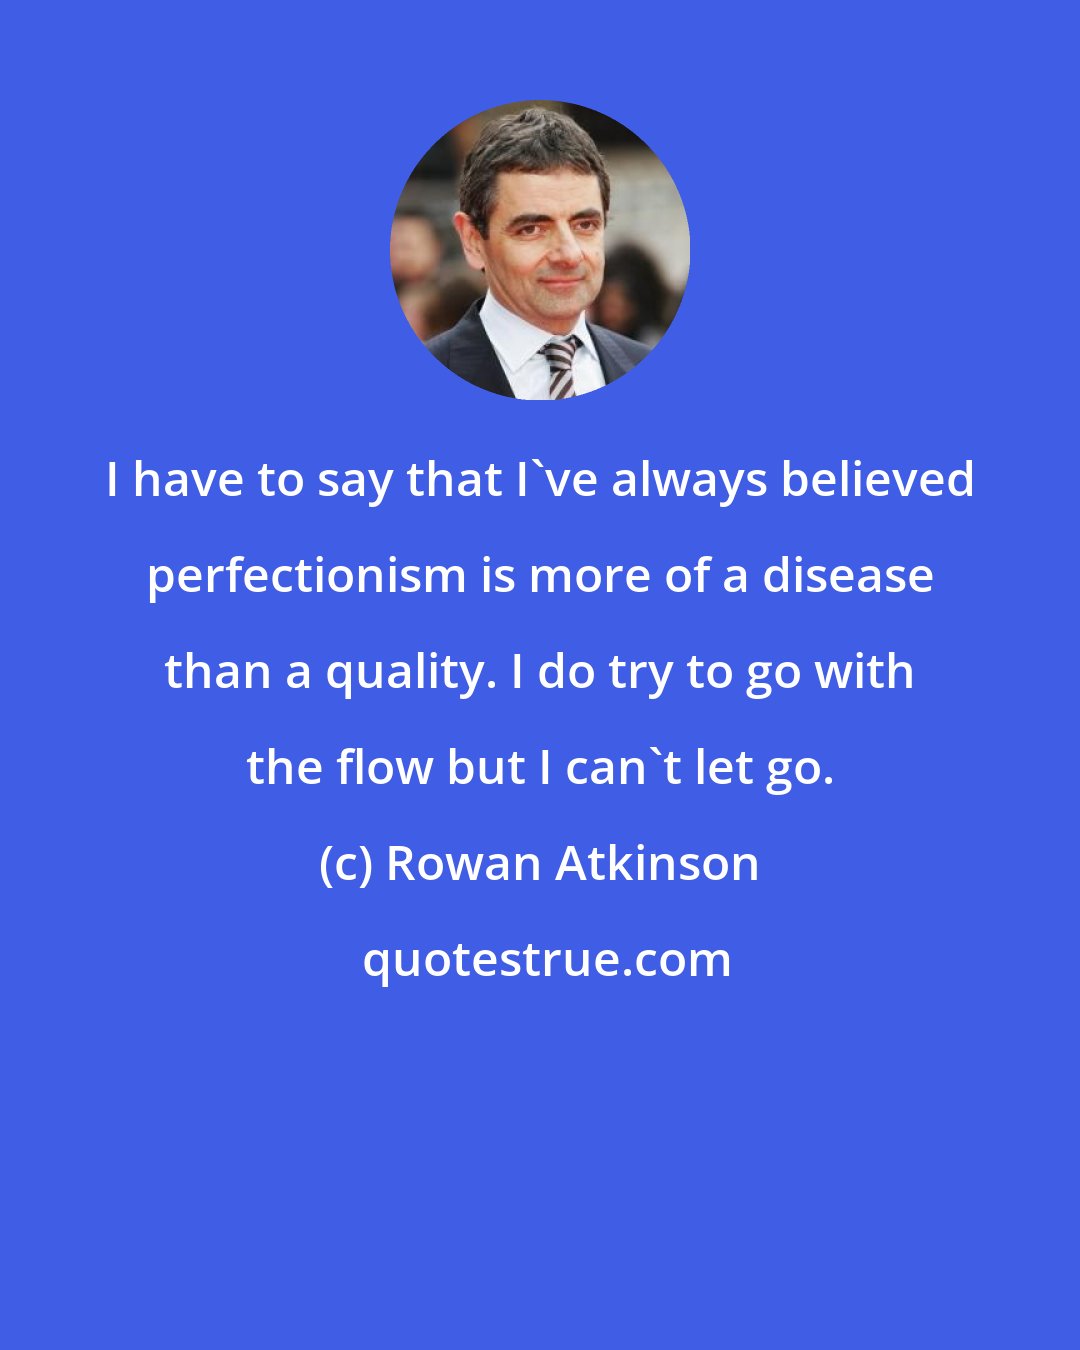 Rowan Atkinson: I have to say that I've always believed perfectionism is more of a disease than a quality. I do try to go with the flow but I can't let go.